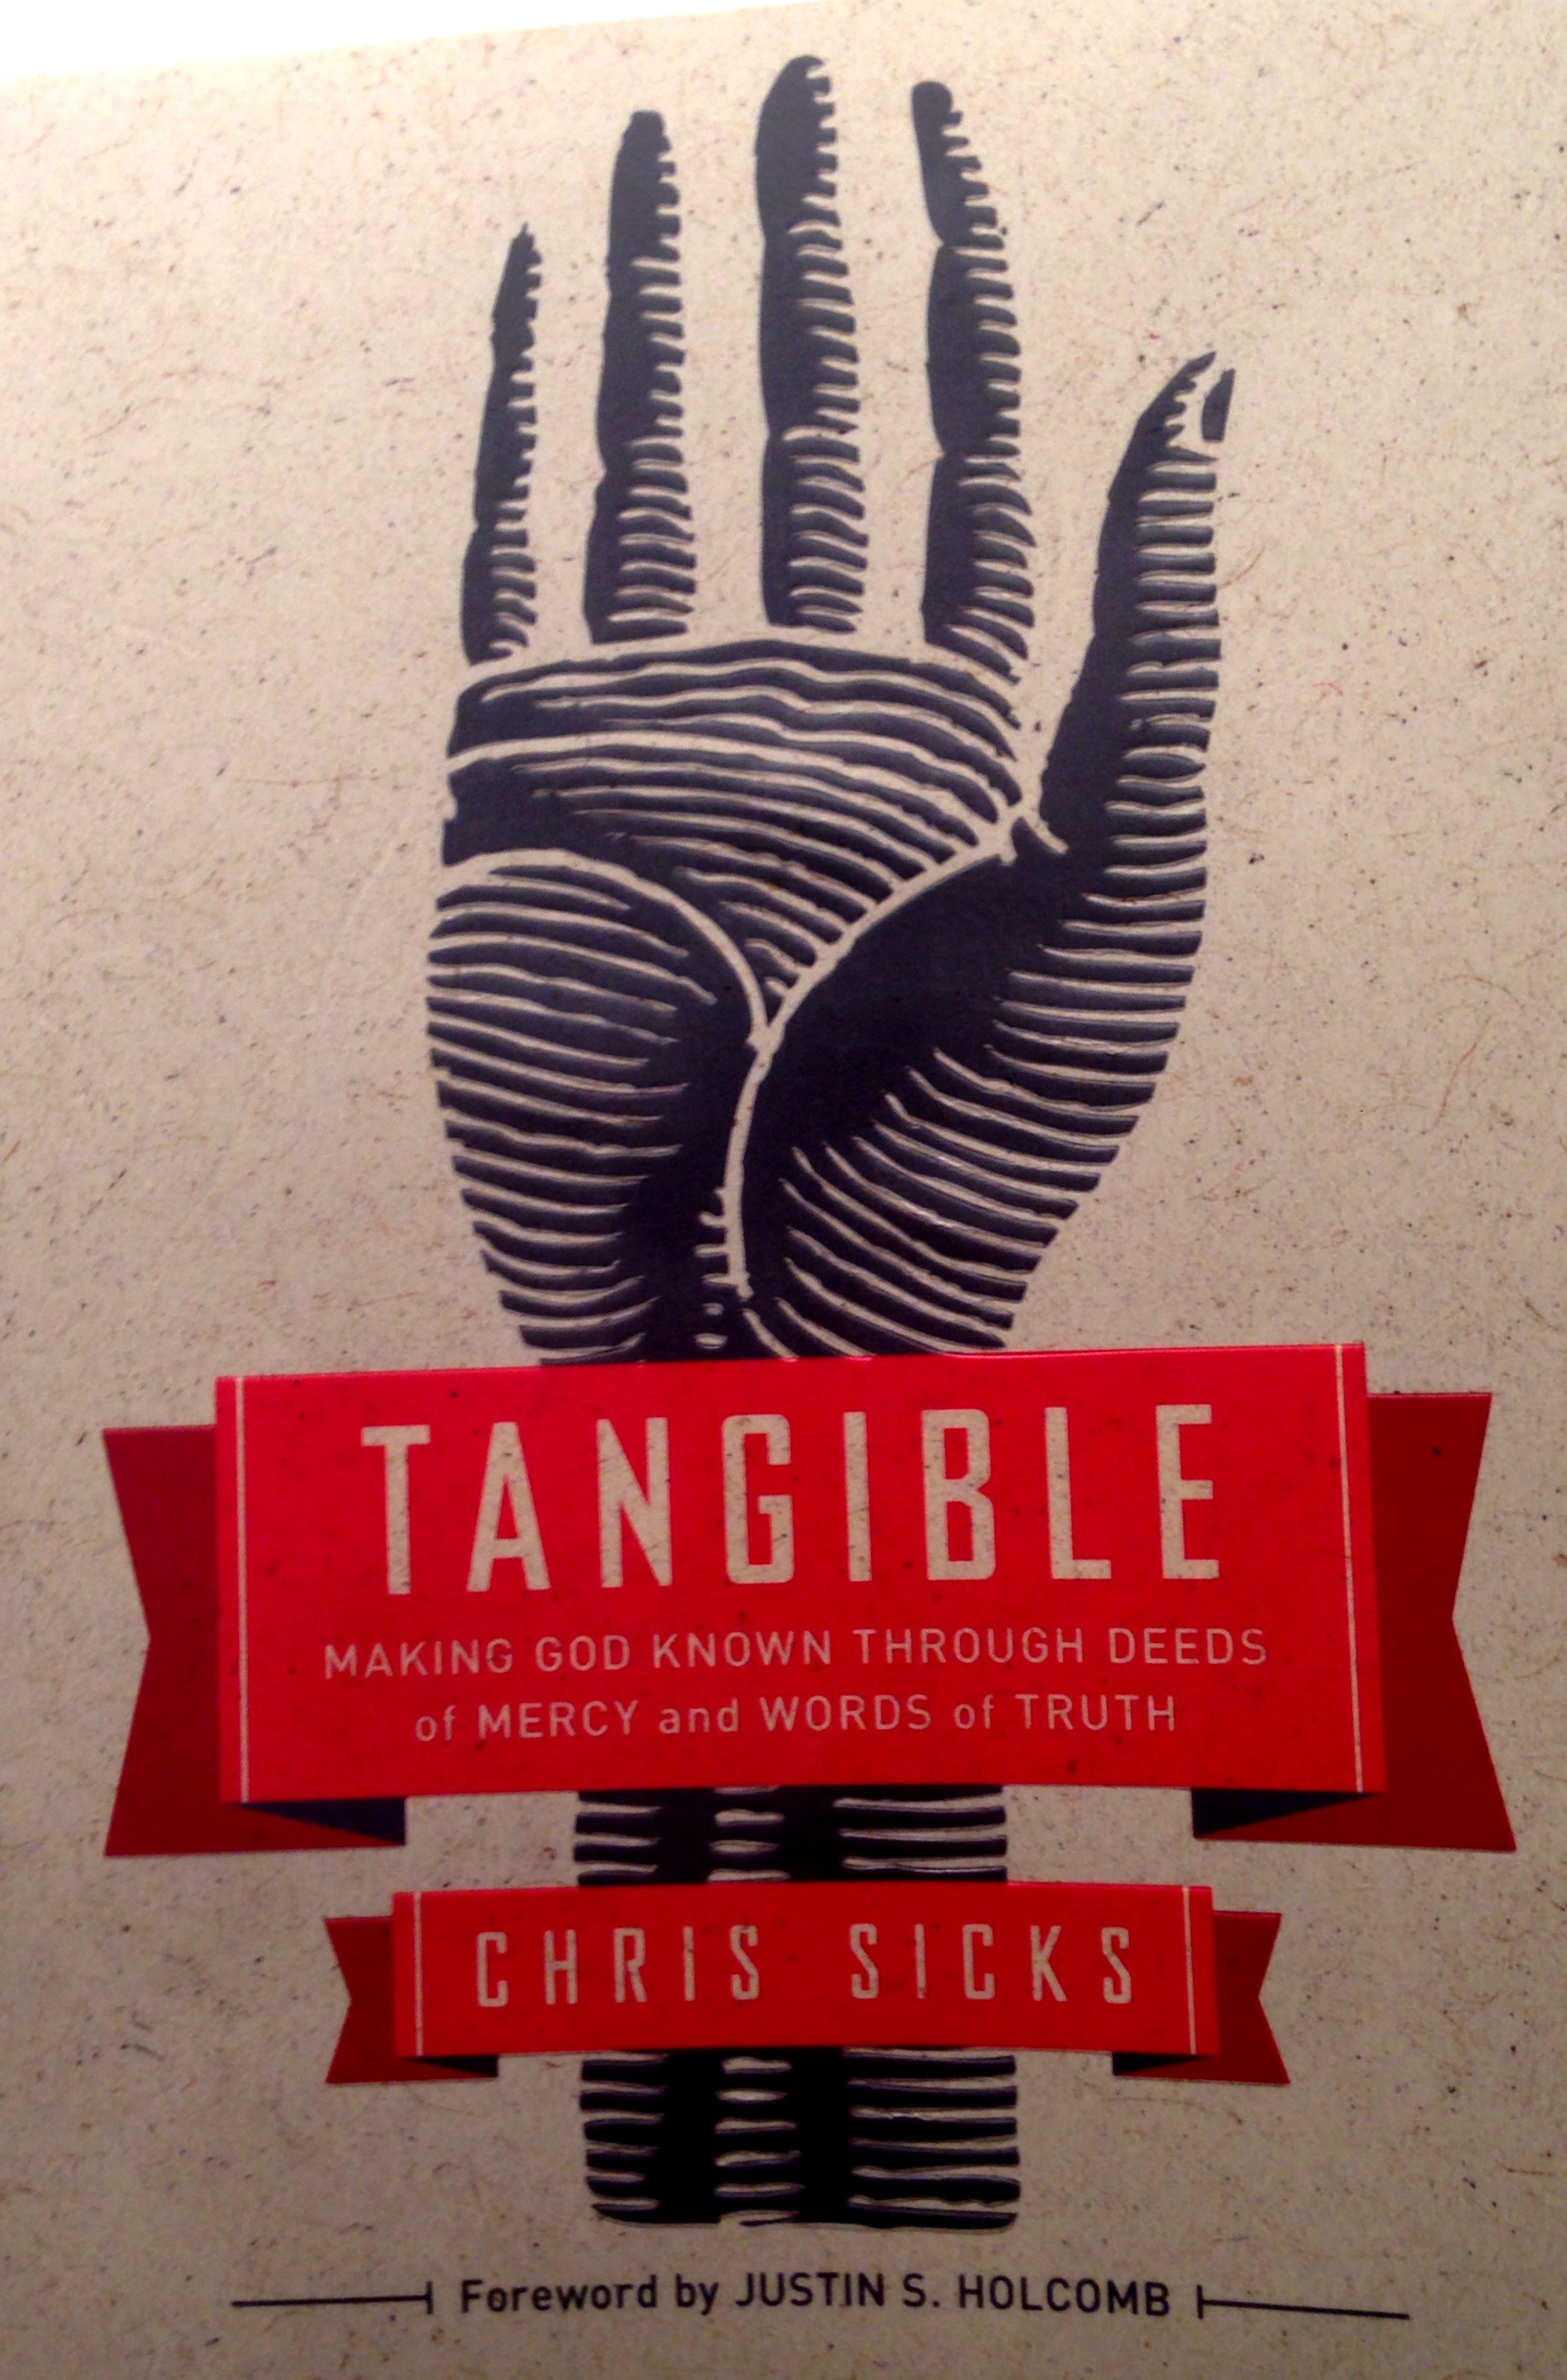 Tangible: A Helpful Resource for Displaying the Gospel